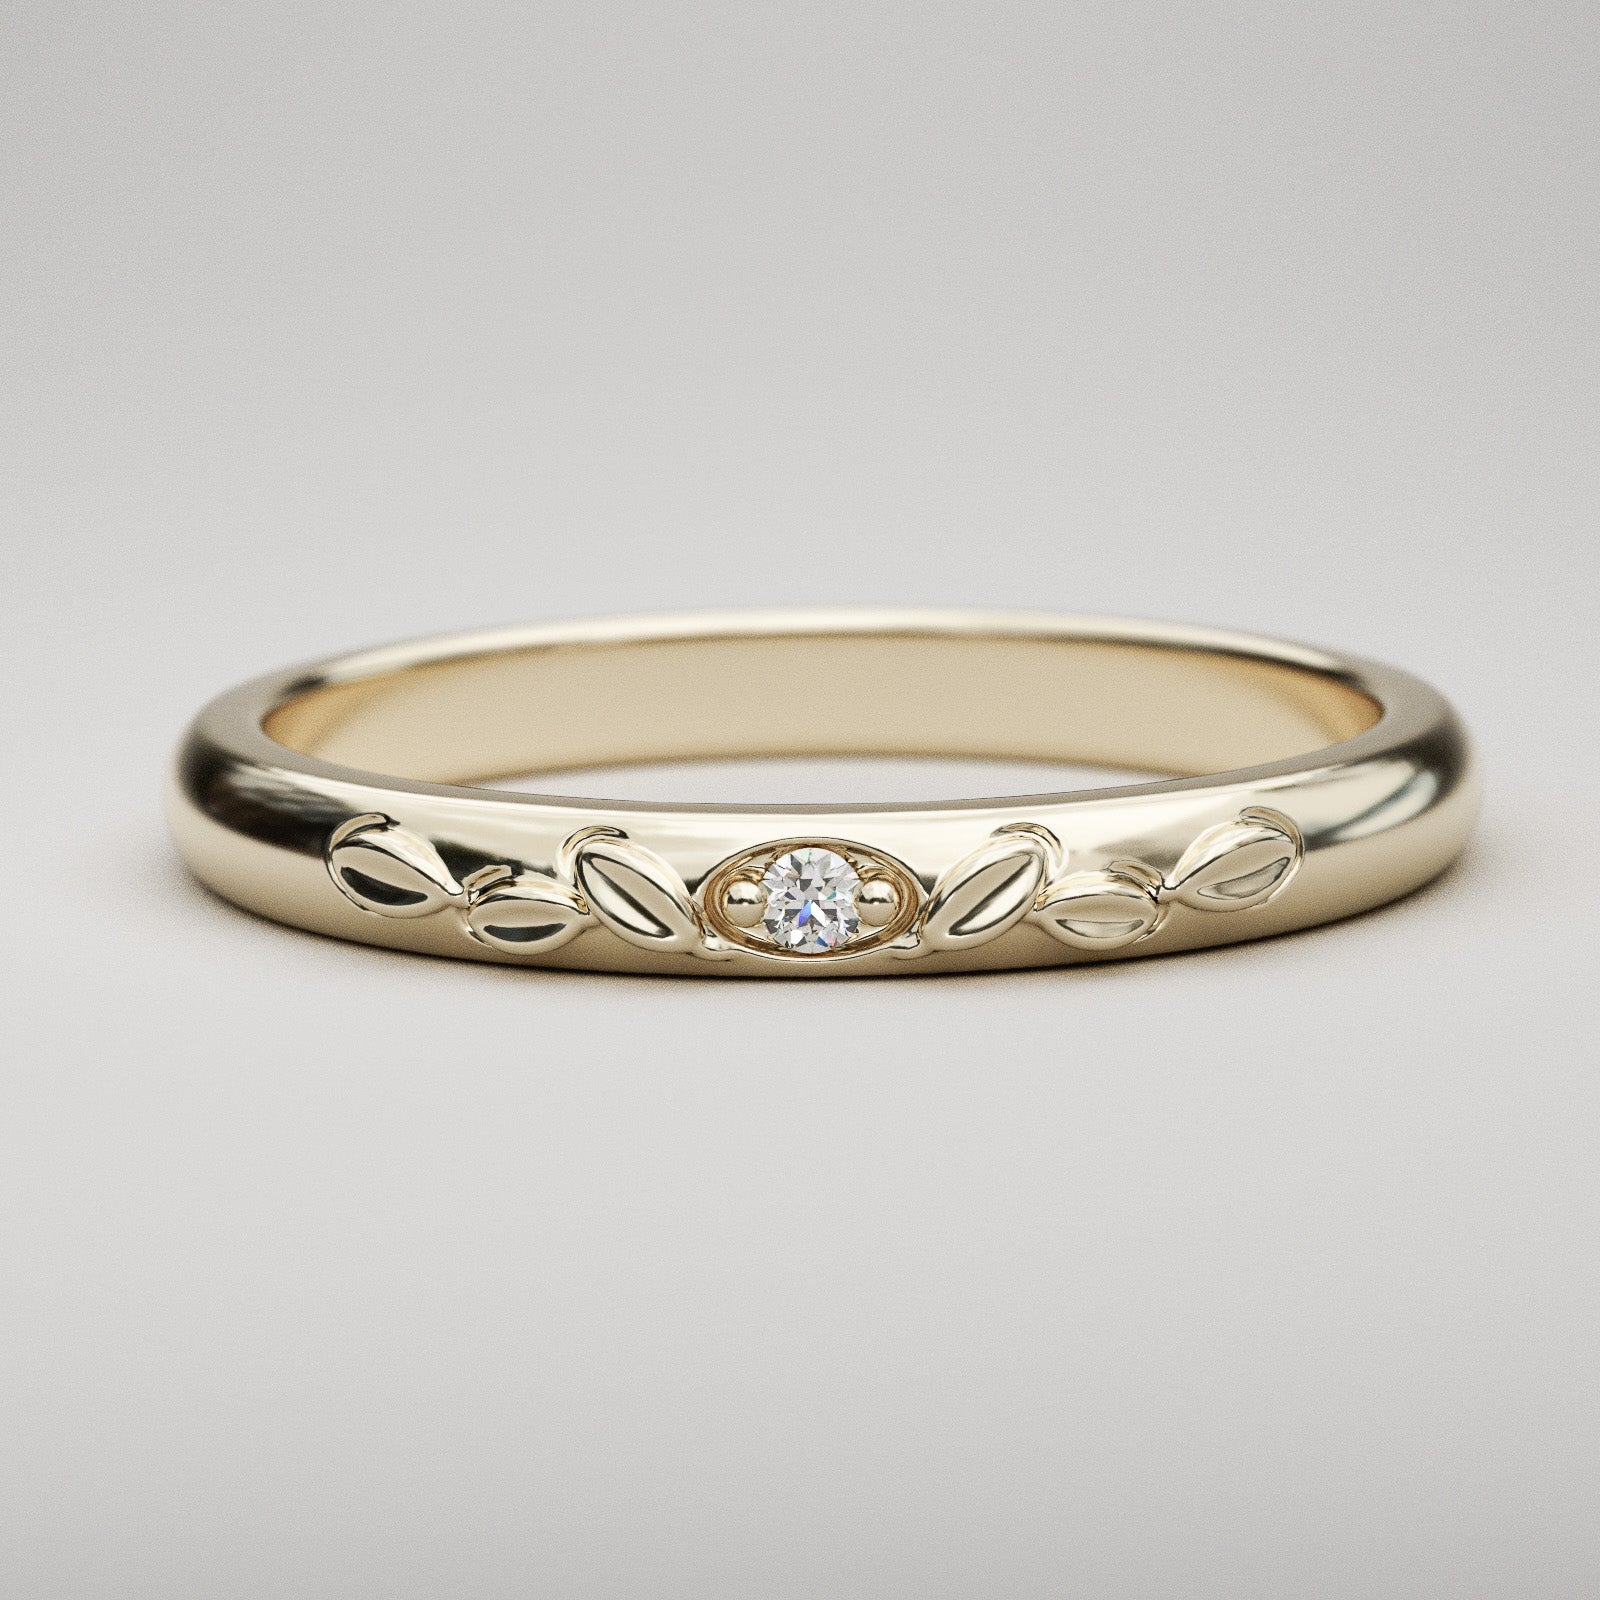 Classic domed gold band with genuine diamond and leaf details